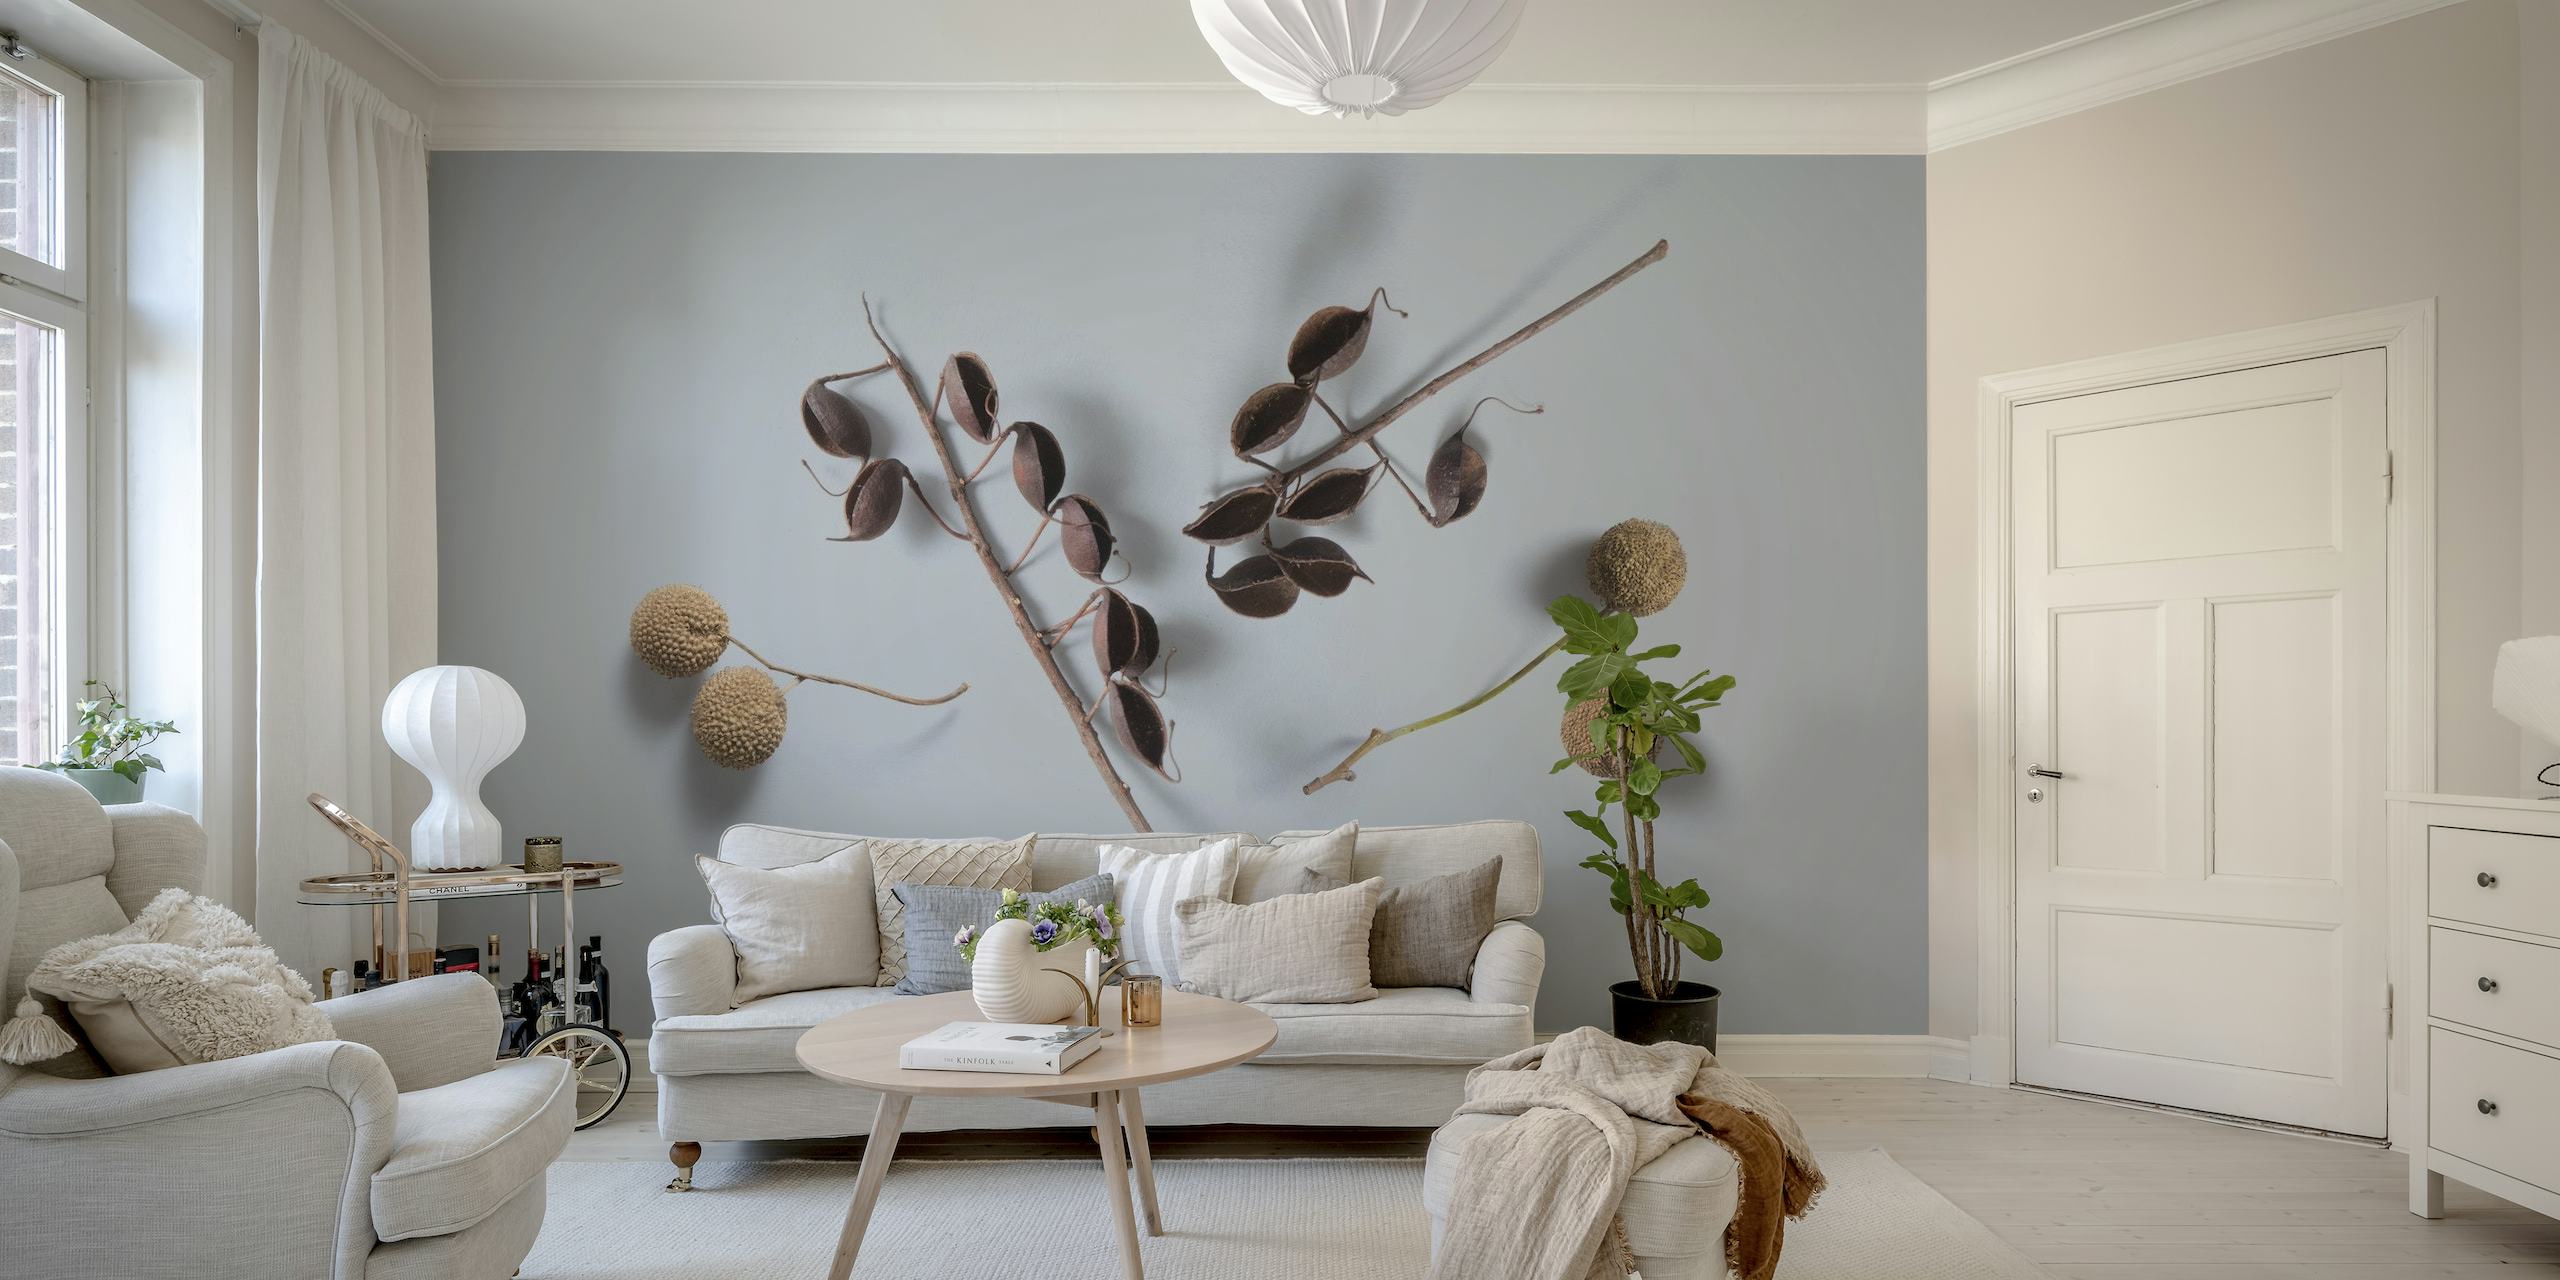 Zen-inspired wall mural with dried plants on a gray background